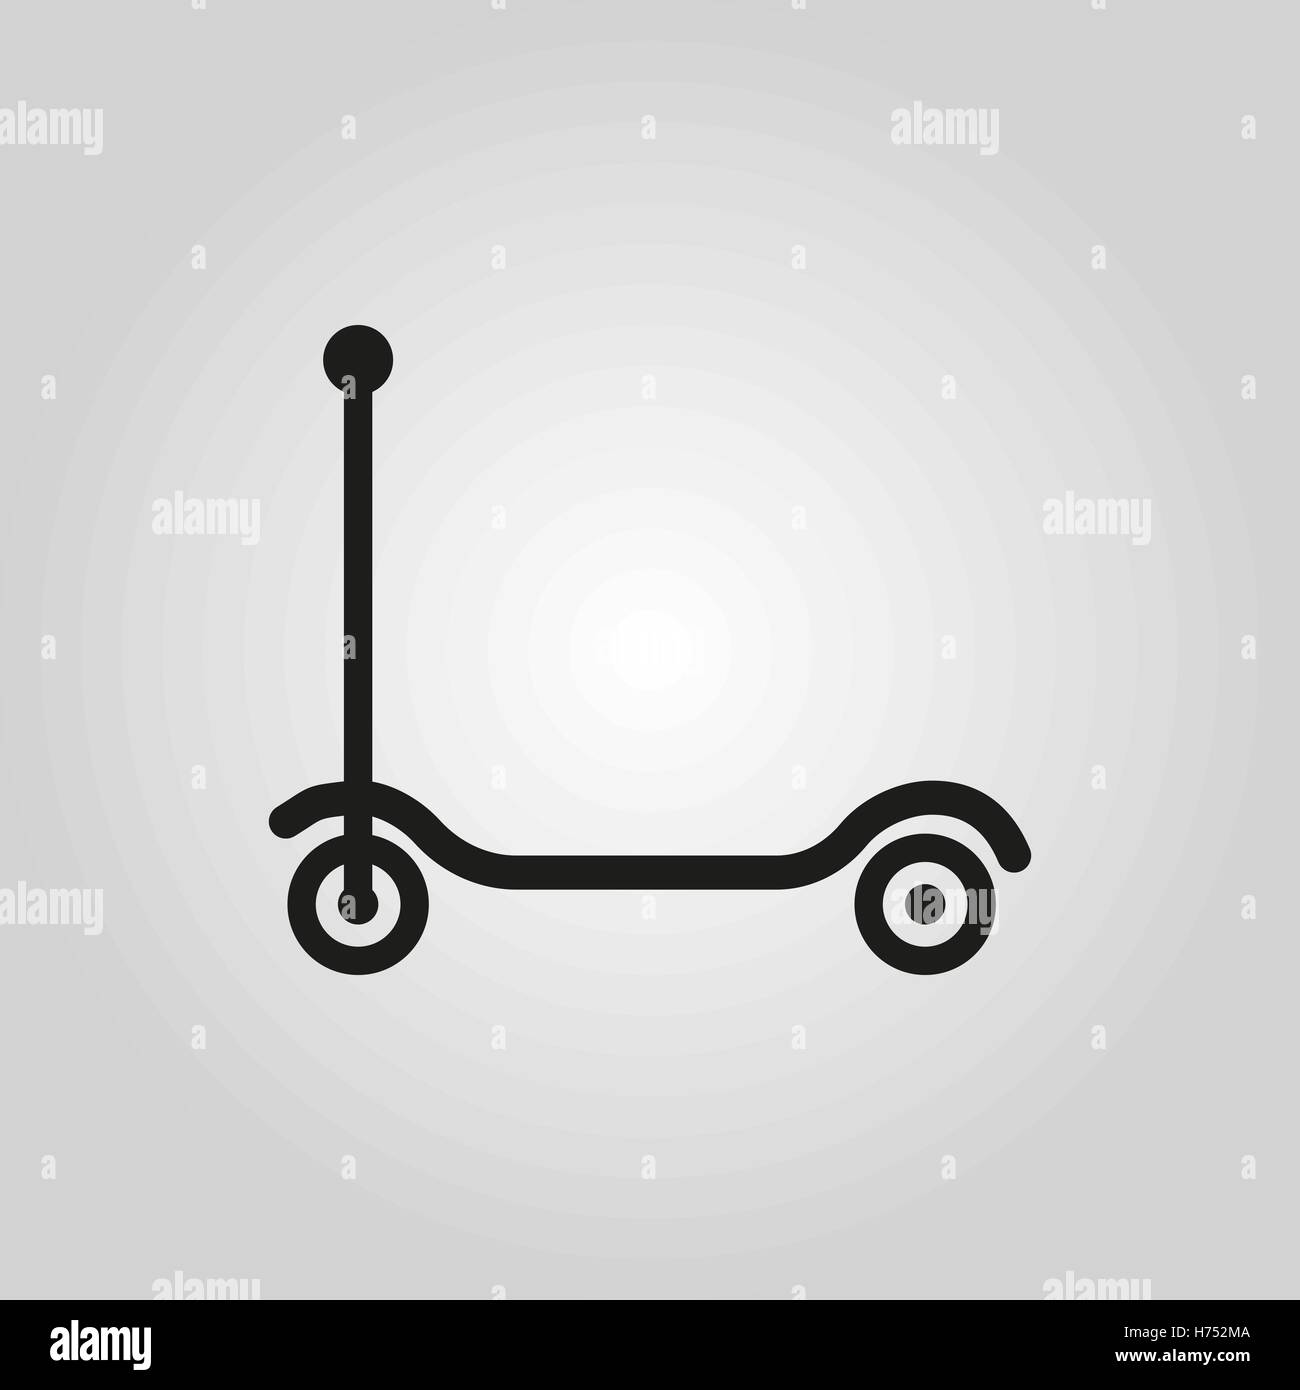 Kick scooter icon. design. Toy symbol. web. graphic. AI. app. logo. object. flat. image. sign. eps. art. picture - stock vector Stock Vector